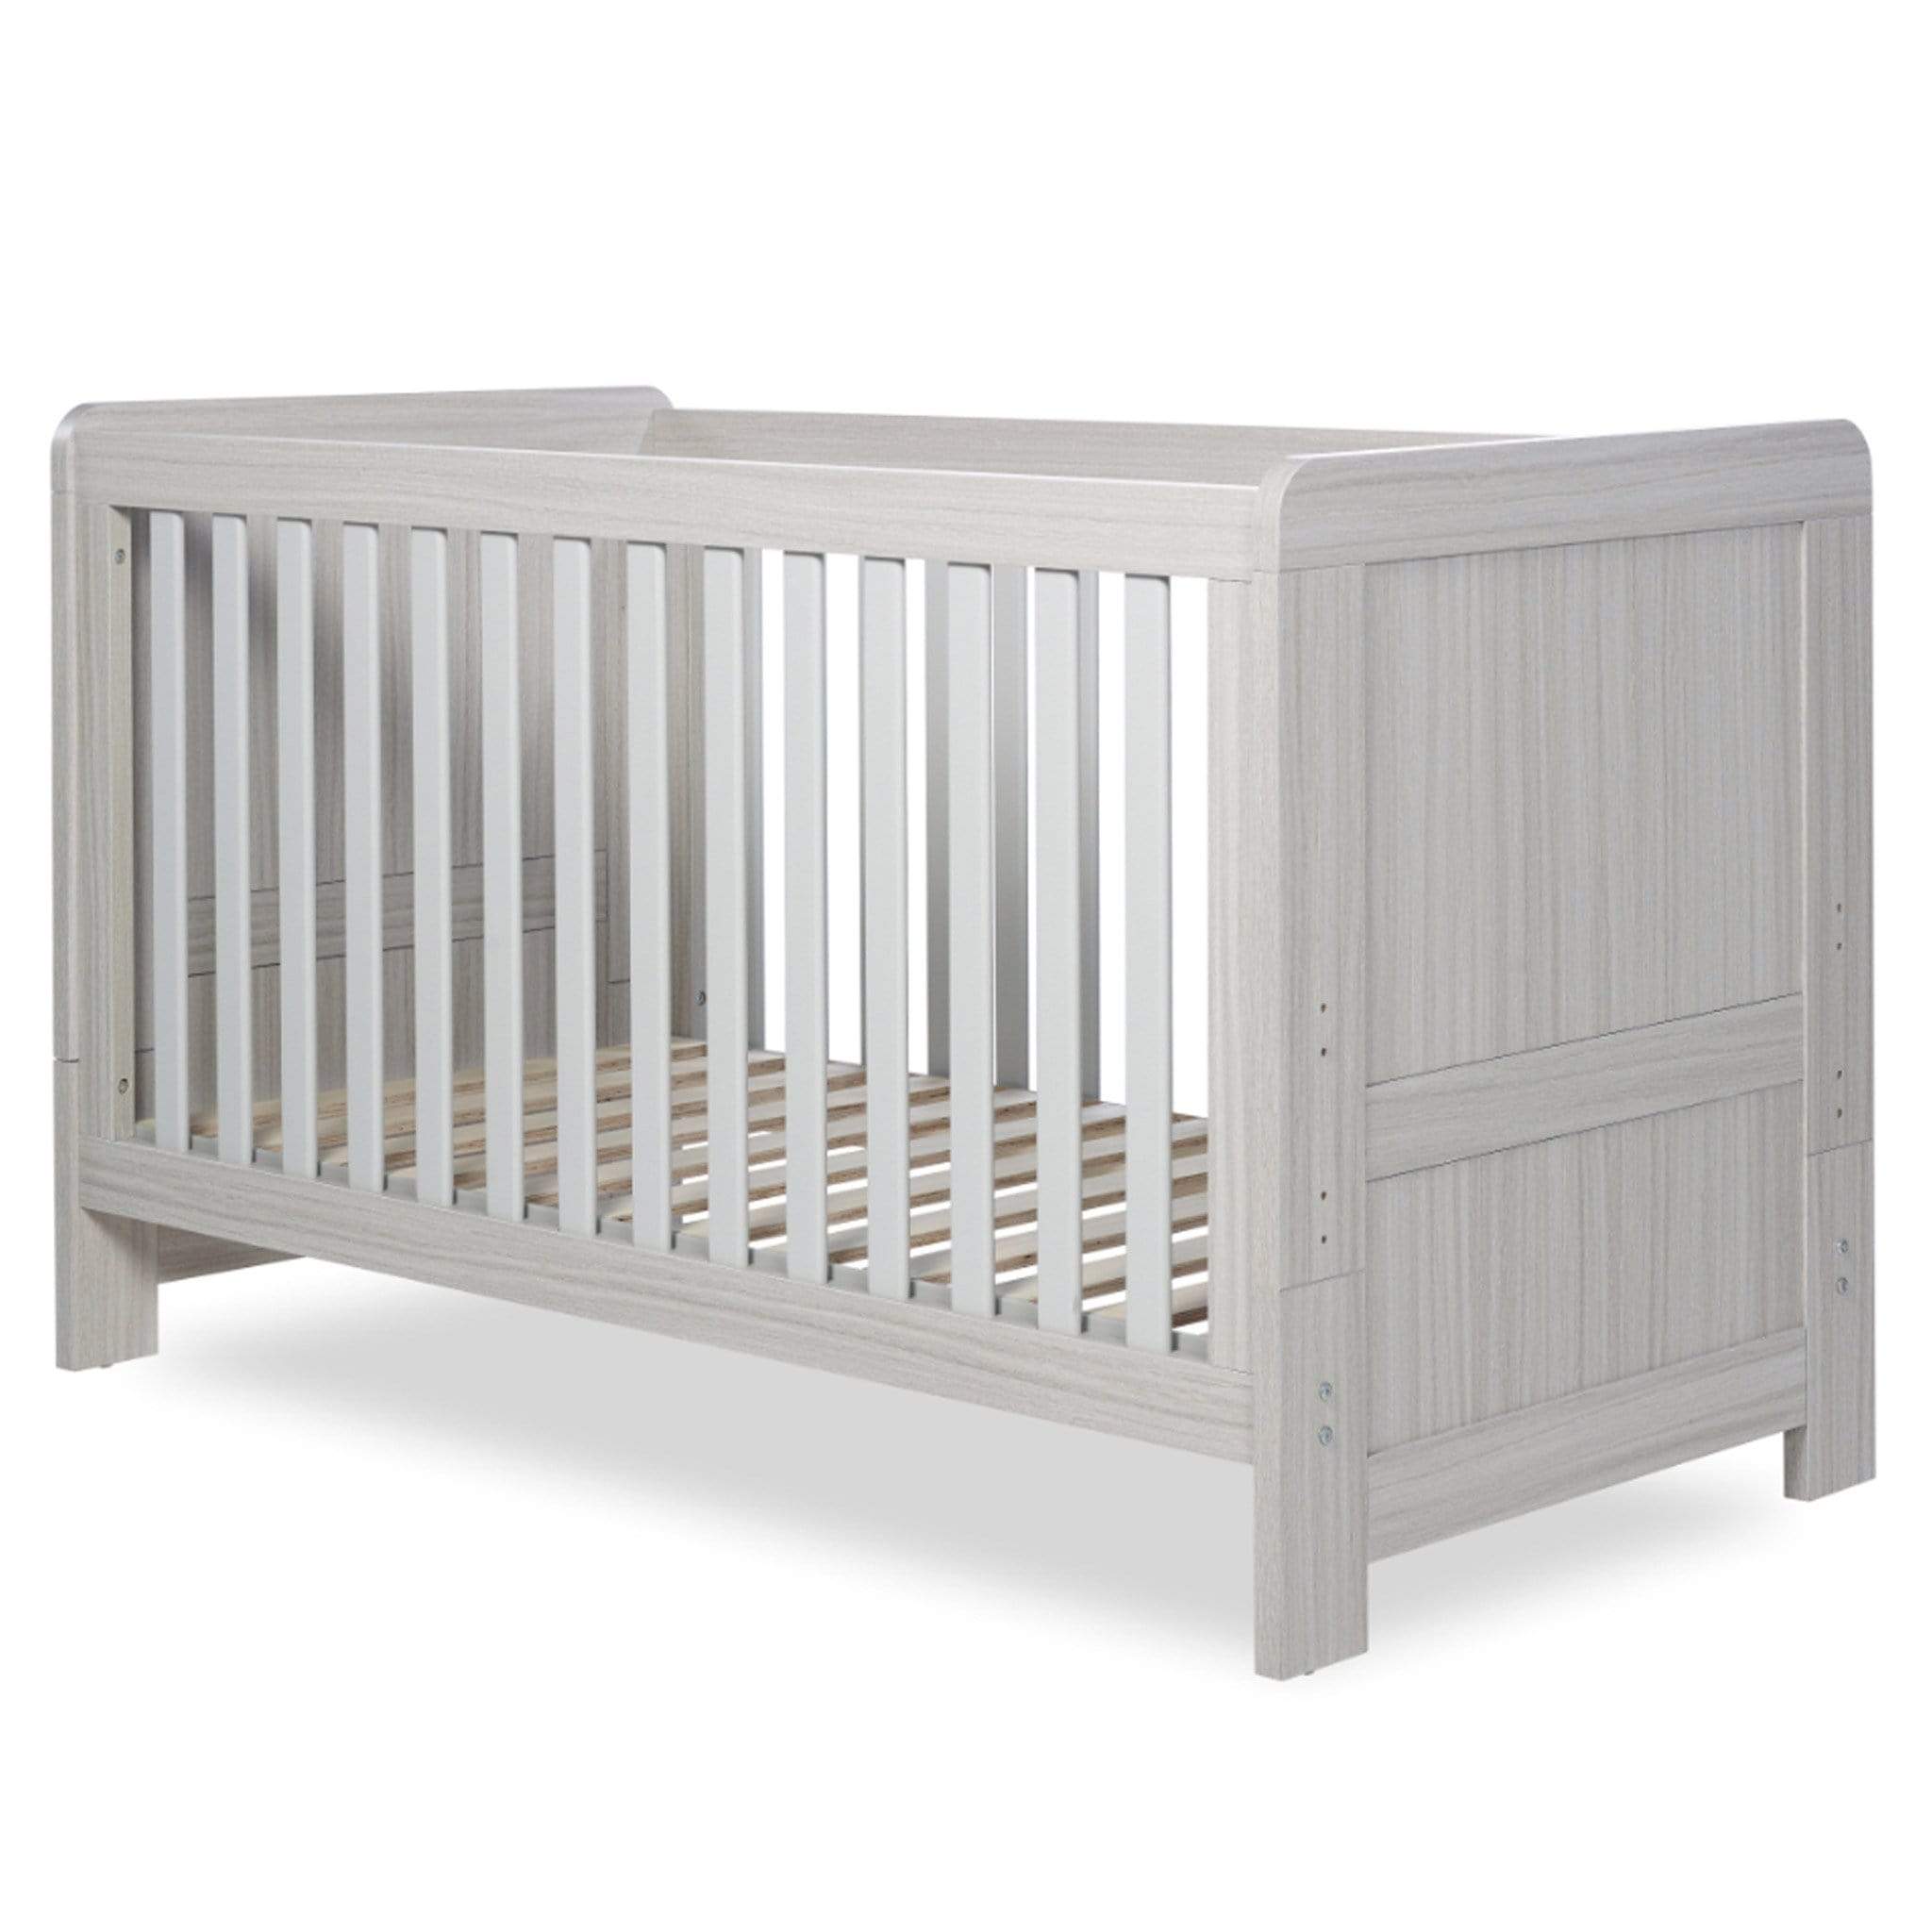 Ickle Bubba Cot Beds Ickle Bubba Pembrey Cotbed Ash Grey